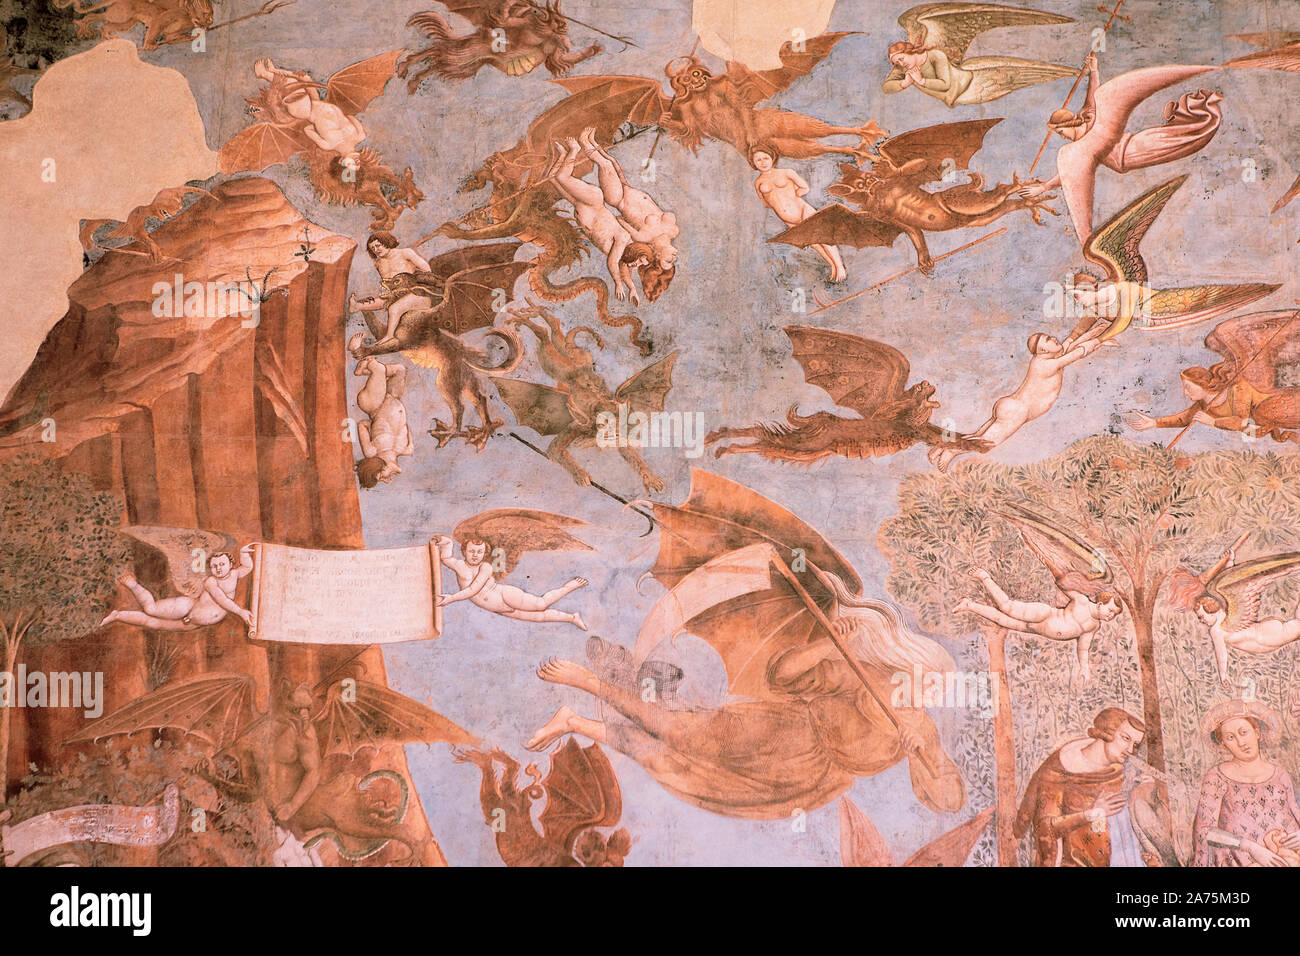 Detail of painting of 'Triumph of Death', last Judgement by Buonamico Buffalmacco, renovated fresco inside the Campo Santo, Pisa, cemetery. Camposanto Stock Photo